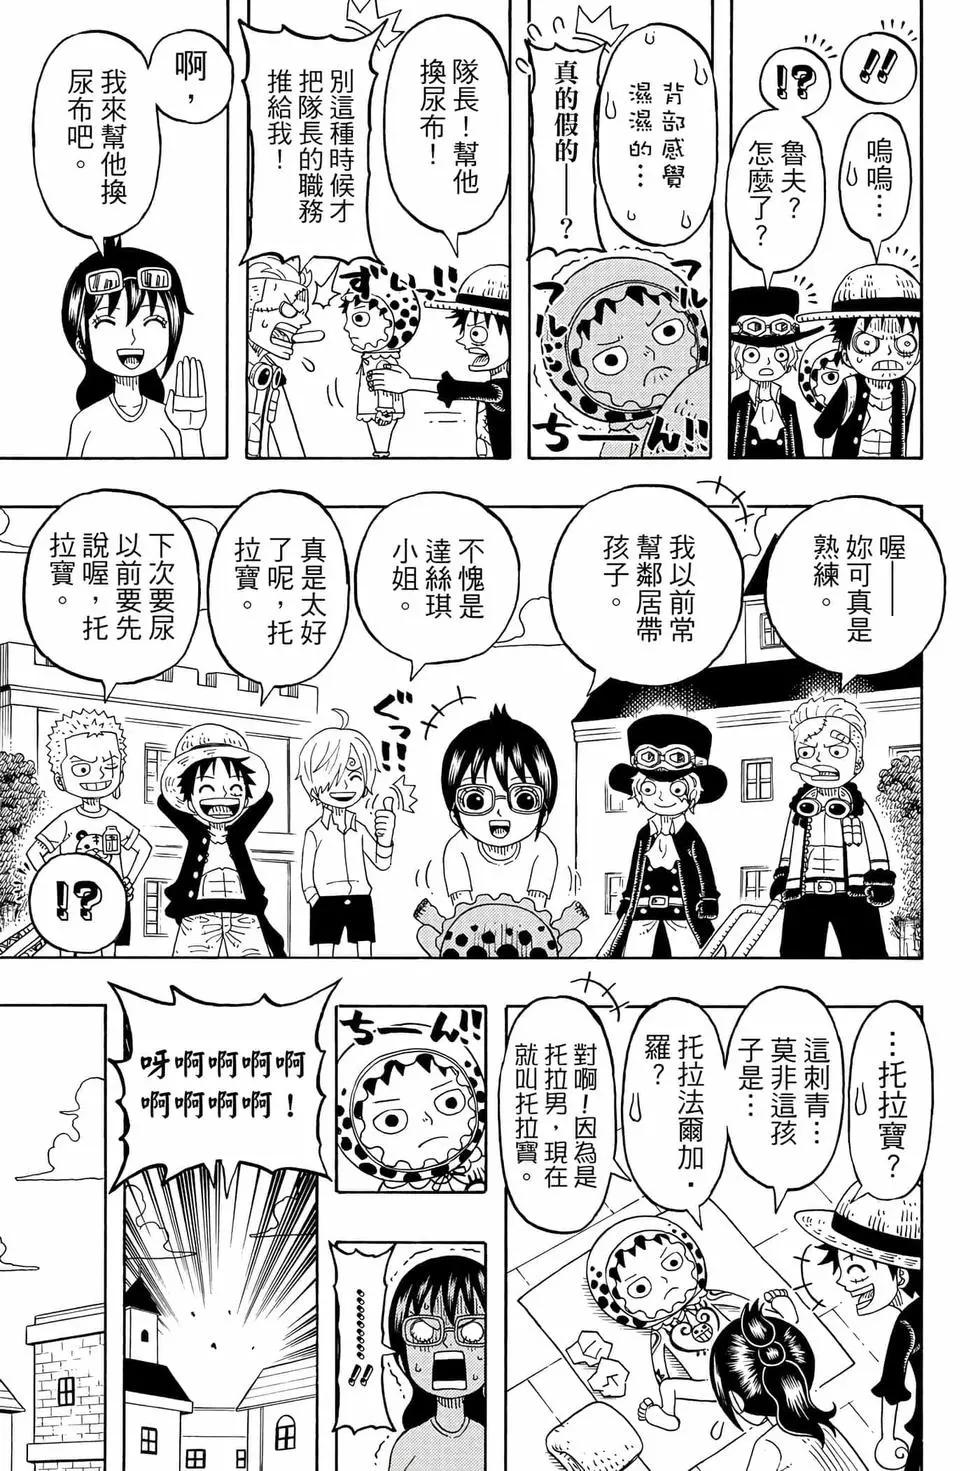 One piece party - 第05卷(1/4) - 4